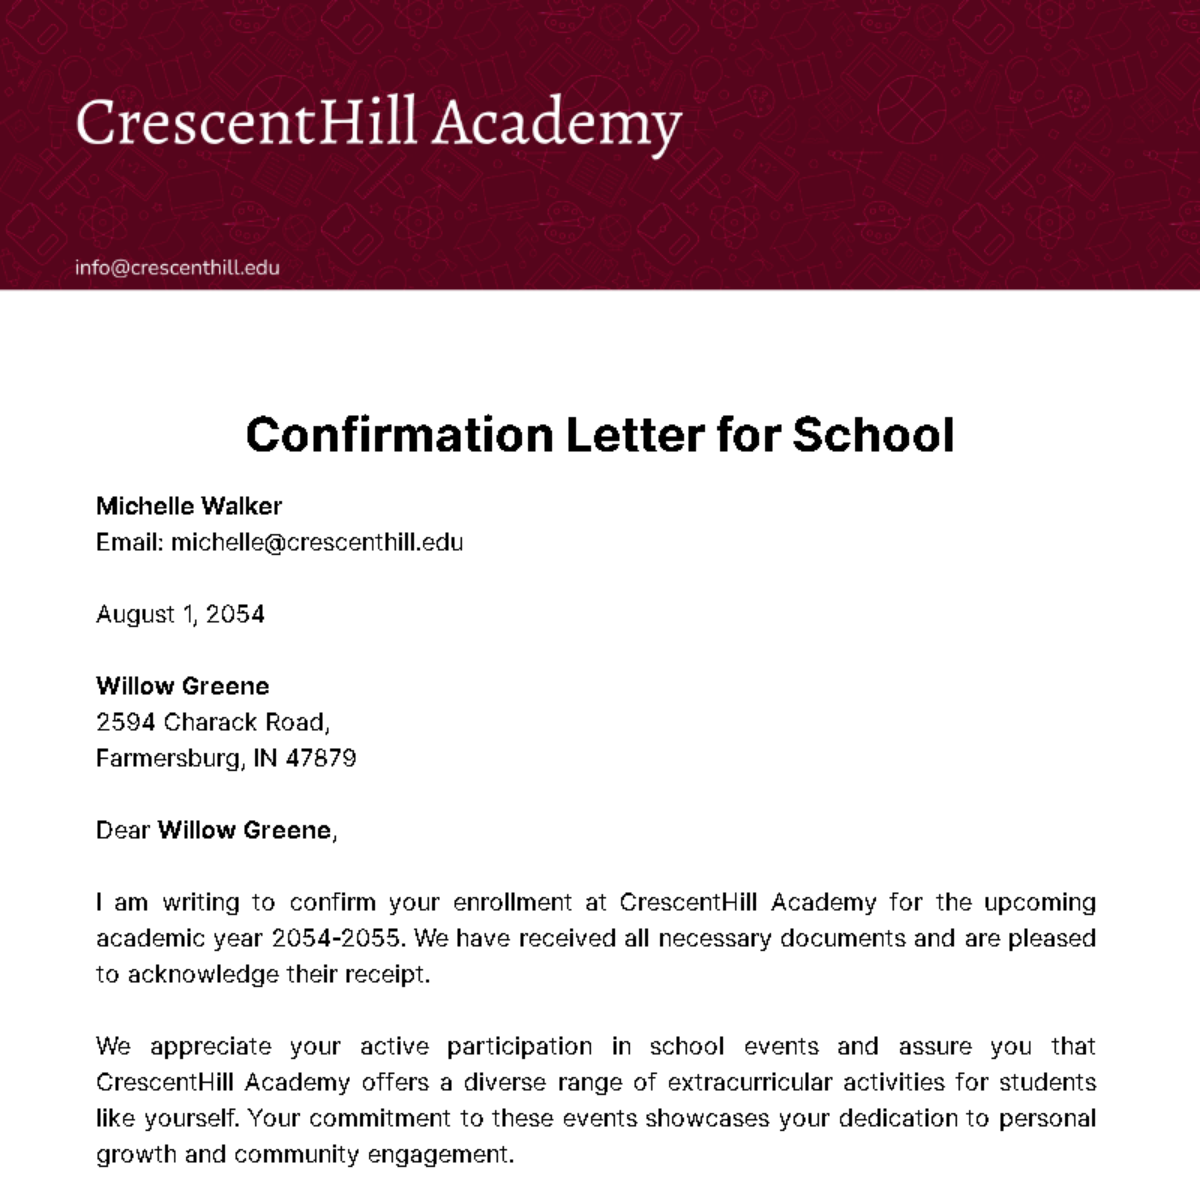 Confirmation Letter for School Template